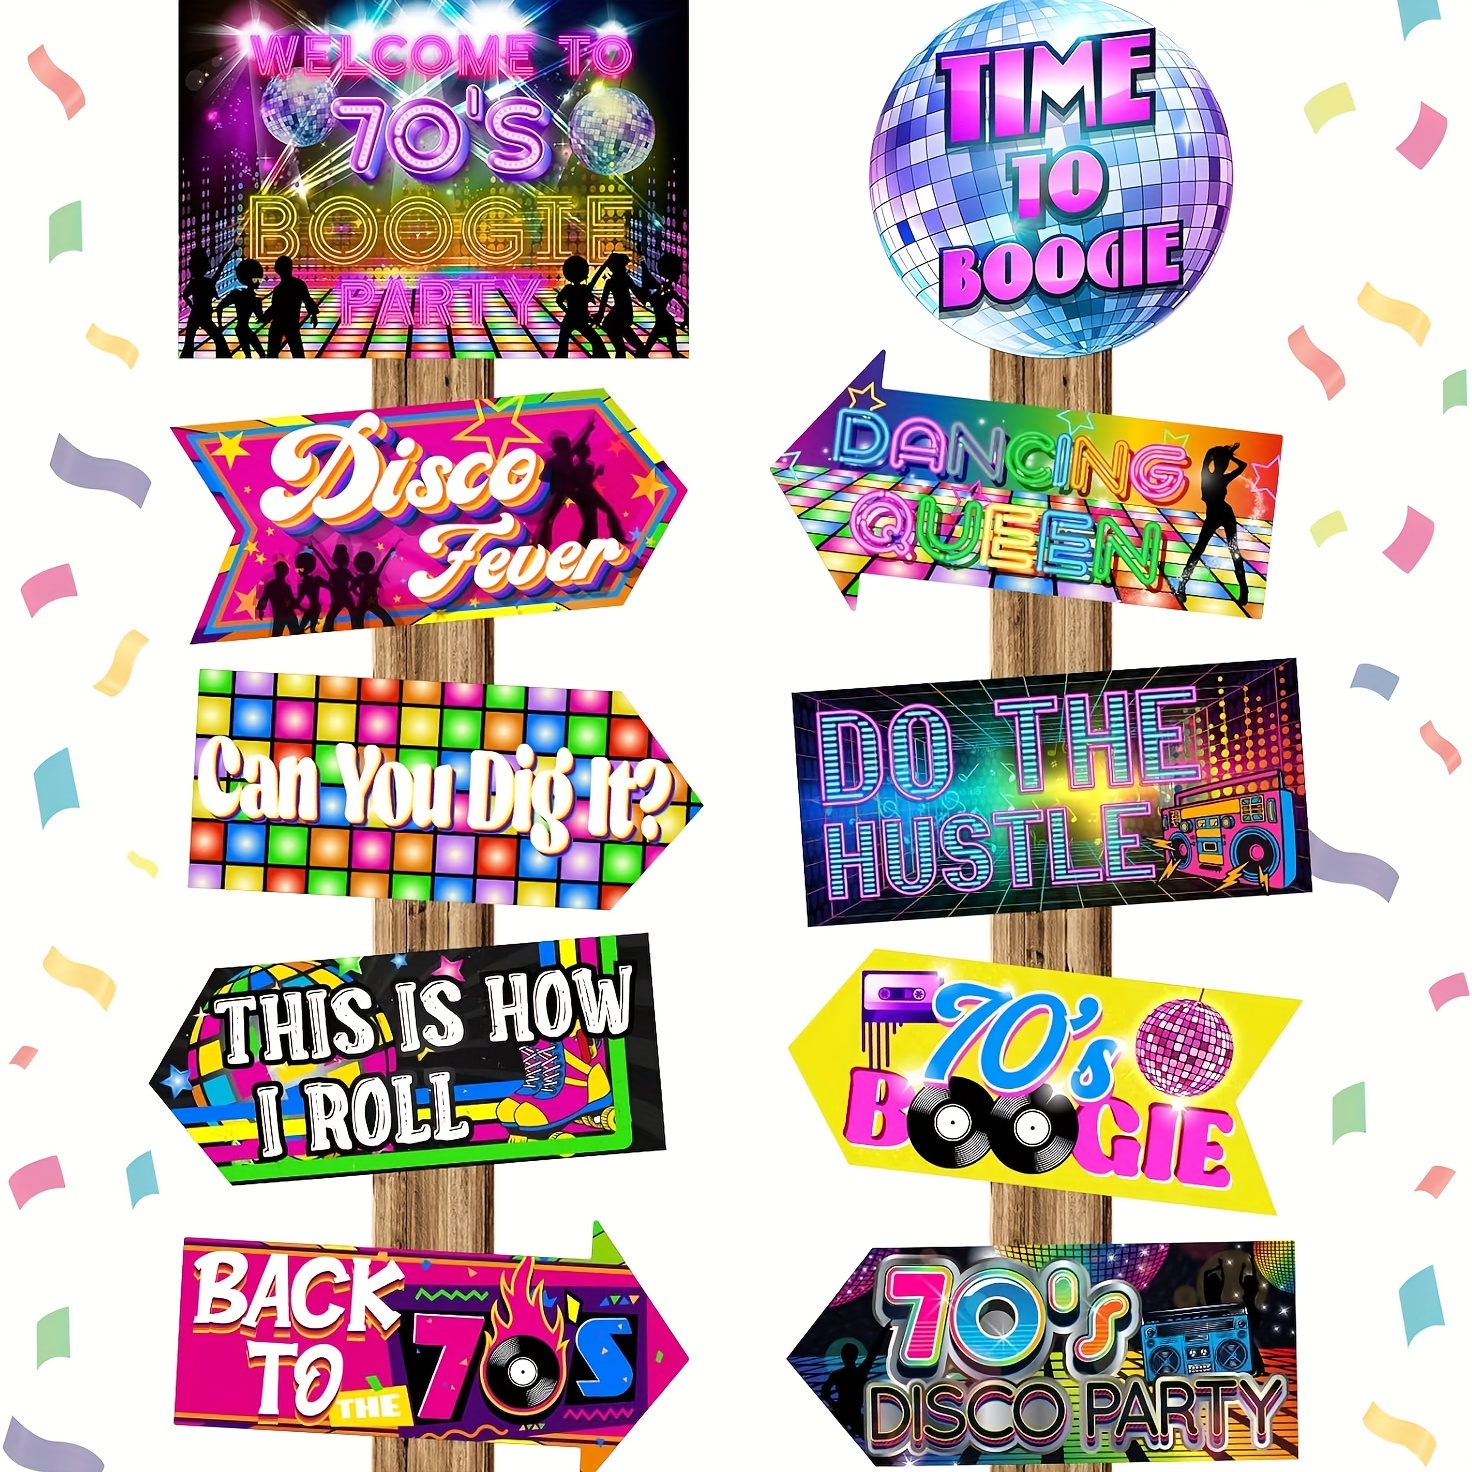 

20pcs 70s Party Sign Disco Party Decorations Funny Disco Decor 1970s Decorations Signs Colorful Dance Party Signs Retro Photo Props For Outdoor Indoor Home Party